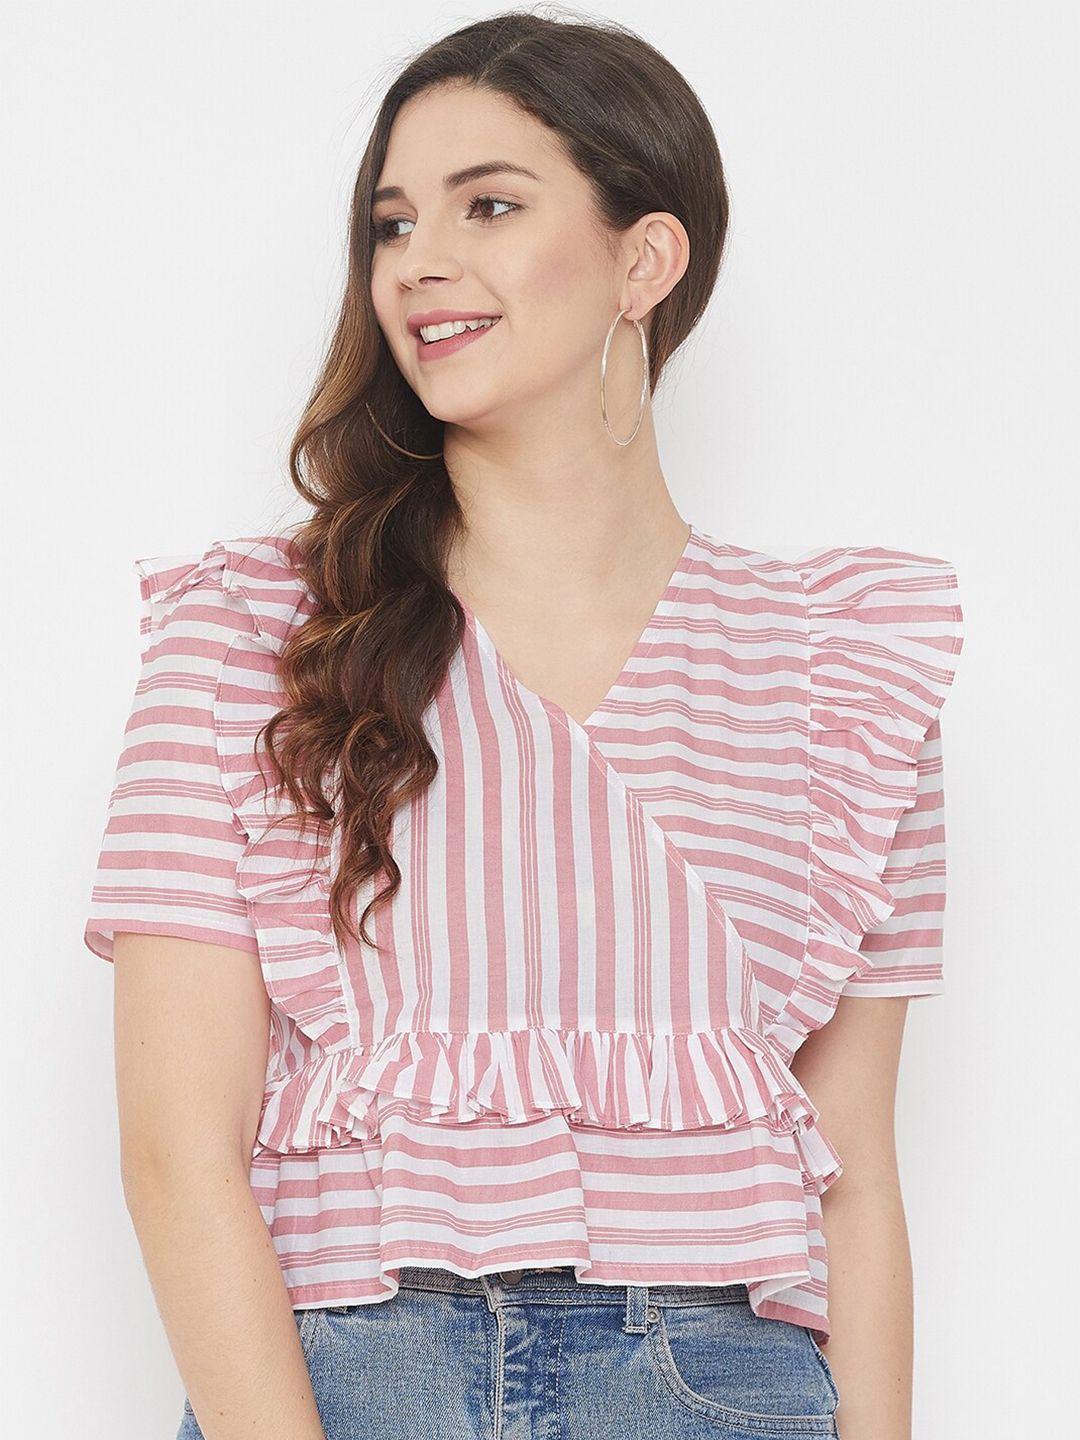 winered-pink-&-white-striped-ruffles-cinched-waist-pure-cotton-crop-top